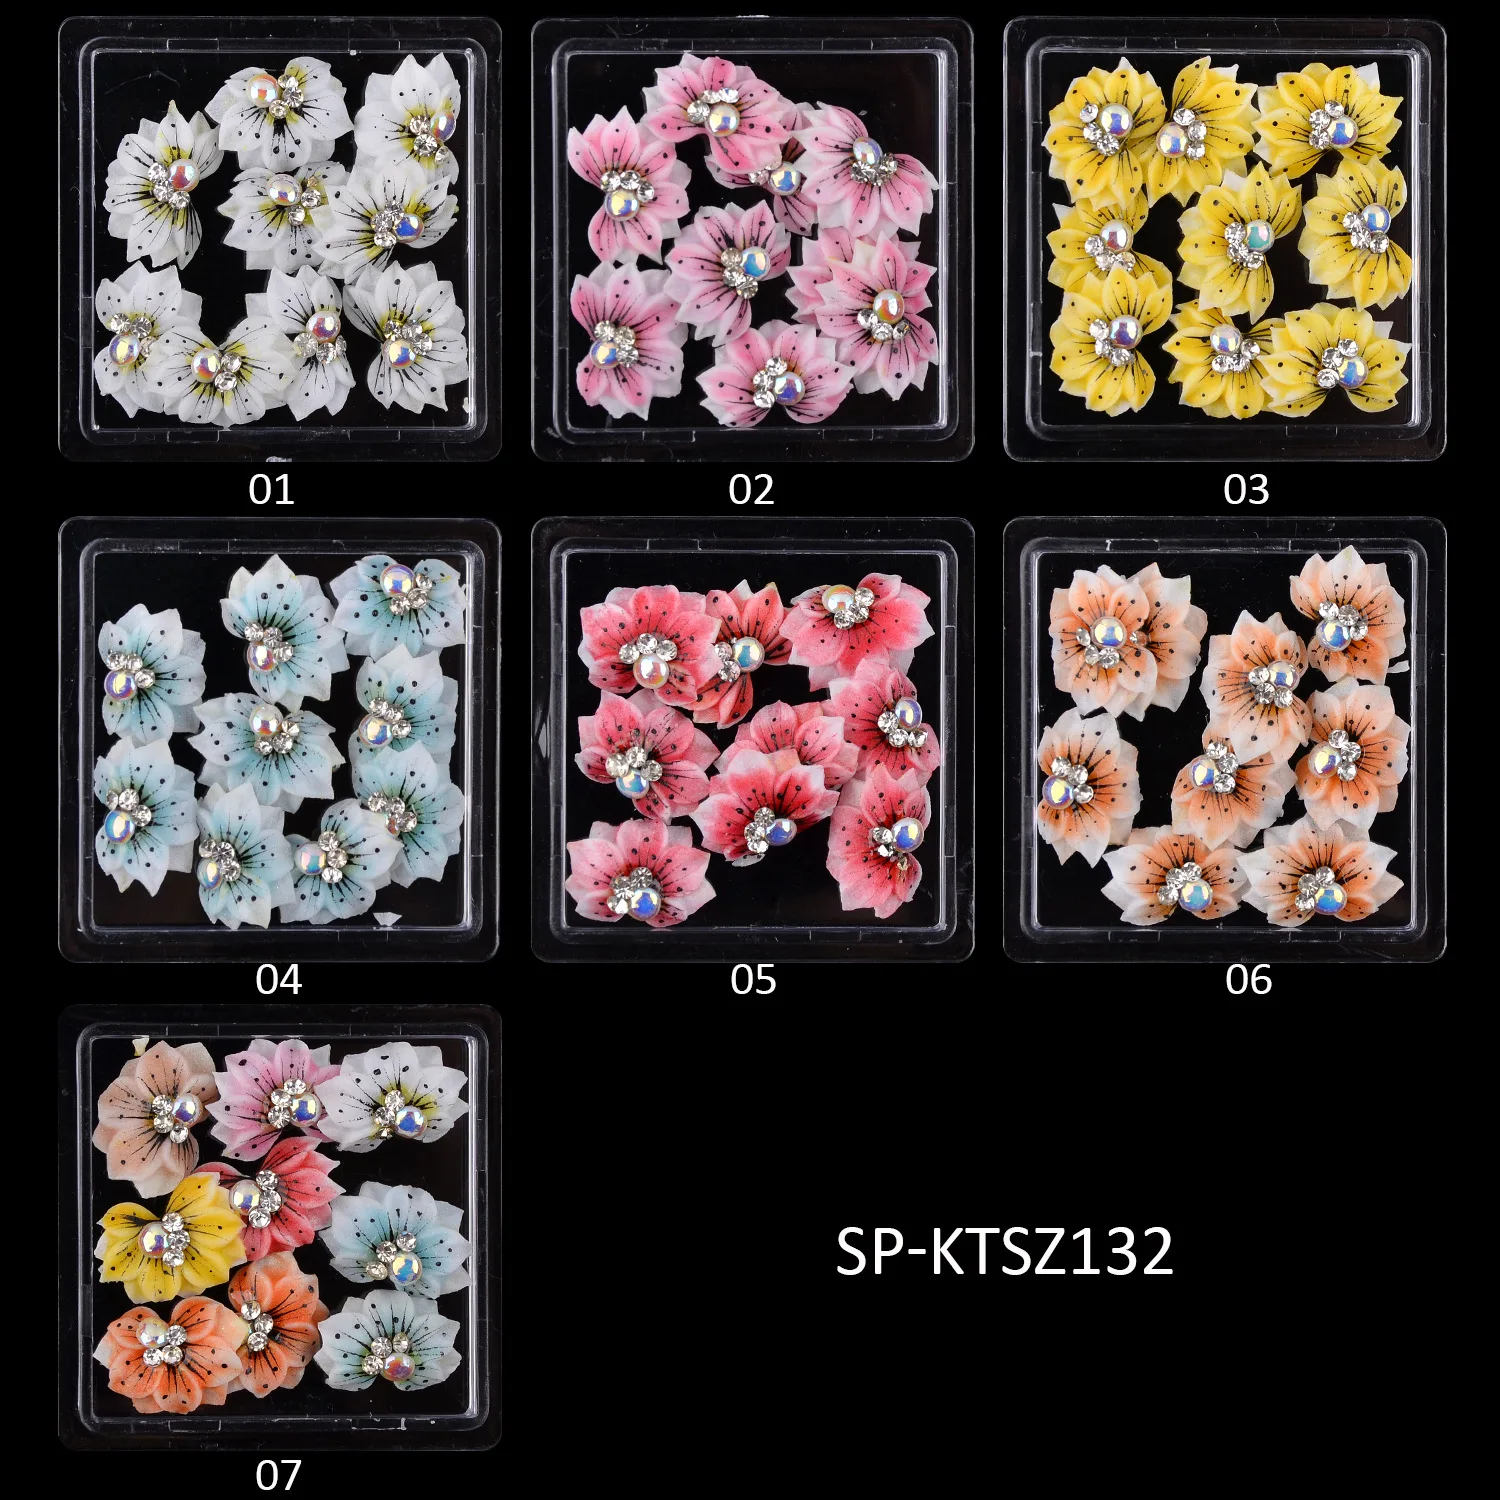 3D Hand-Made Acrylic Flower For Acrylic Nails Manual Craft Flowers/Butterfly(Crystal Stones) 9PCS Engraved Petal Hand Nail Adorn